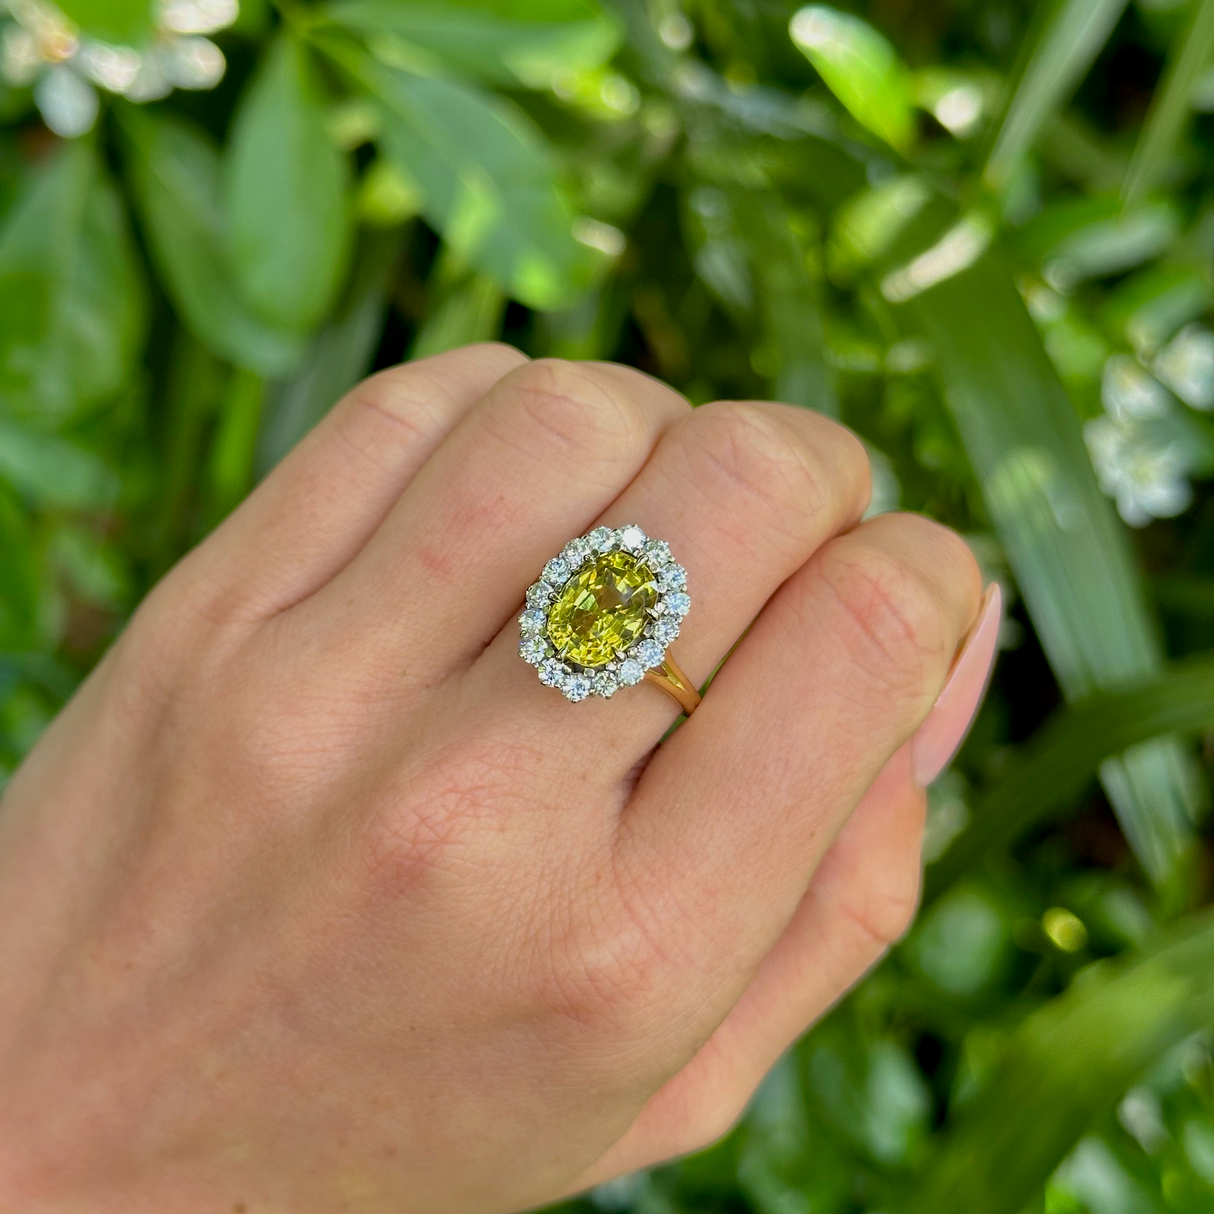 Vintage, 1980s Chrysoberyl and Diamond Cluster Cocktail Ring, 18ct Yellow Gold